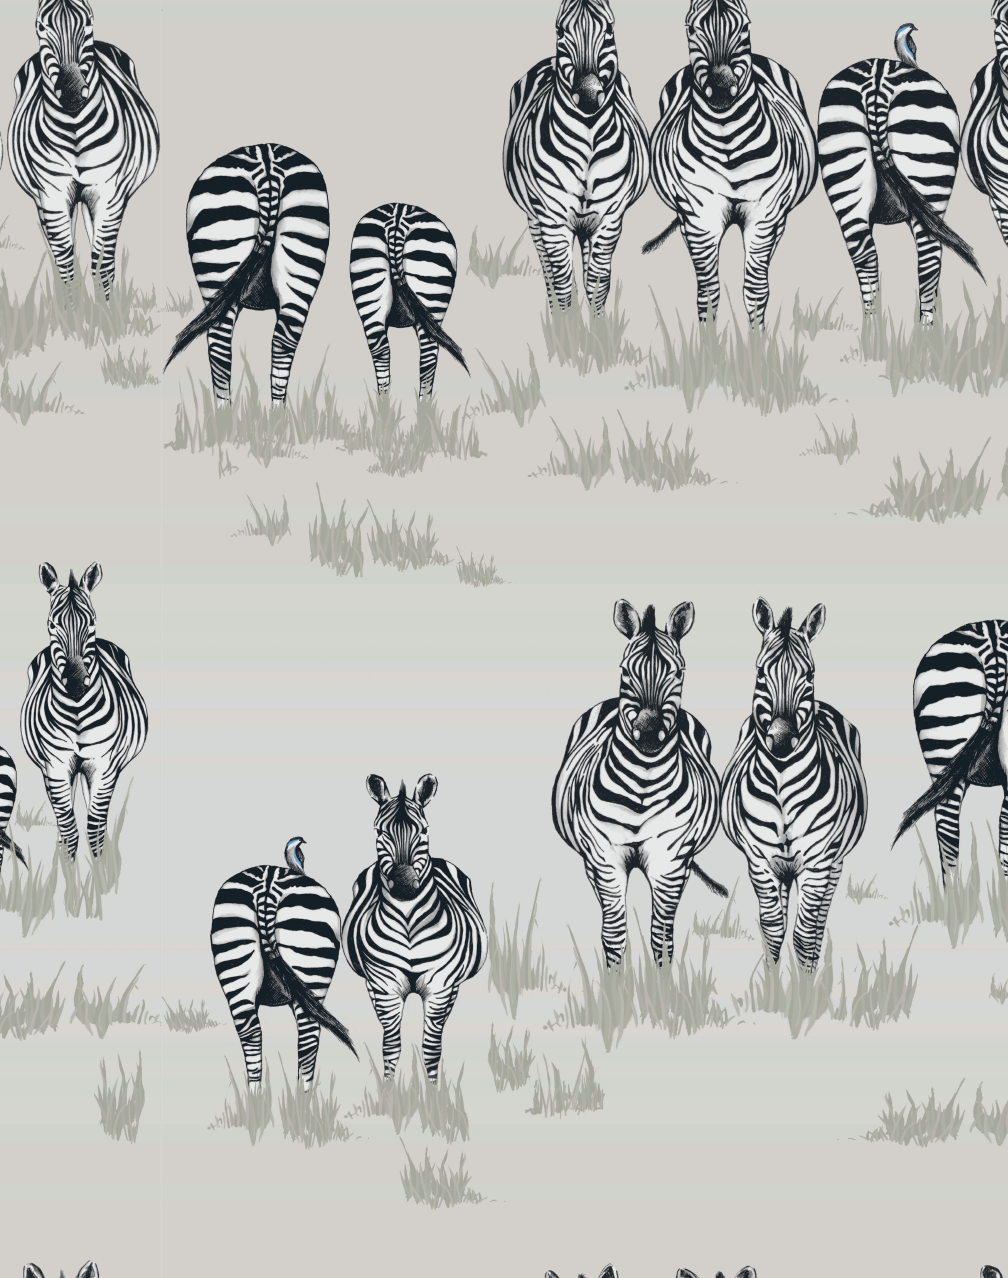 Collective The Pattern Zebras –